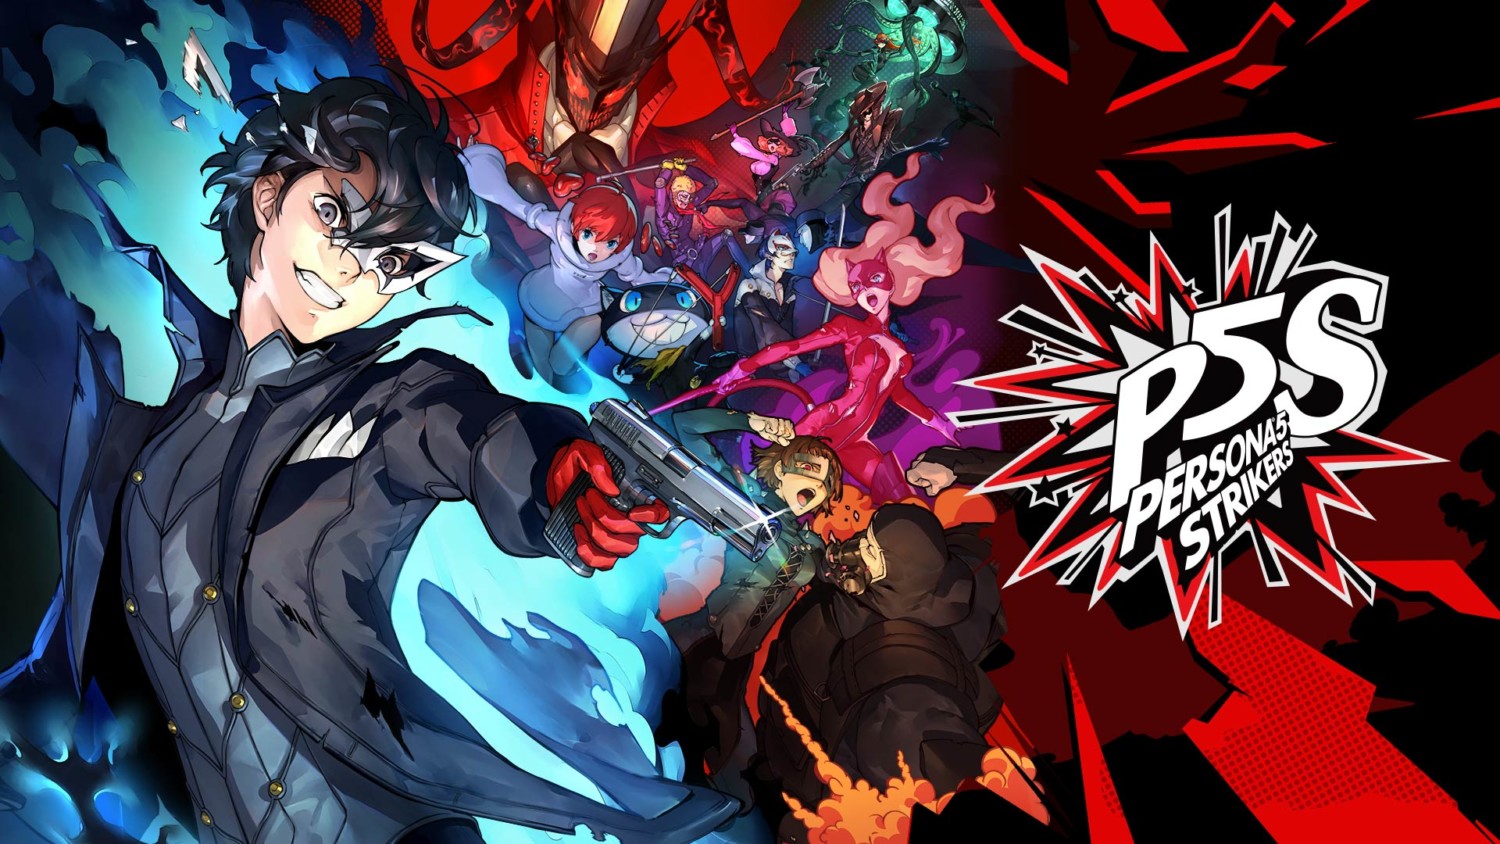 Persona 5 Strikers and Persona 5 Royal Soundtracks Now Available on Sp